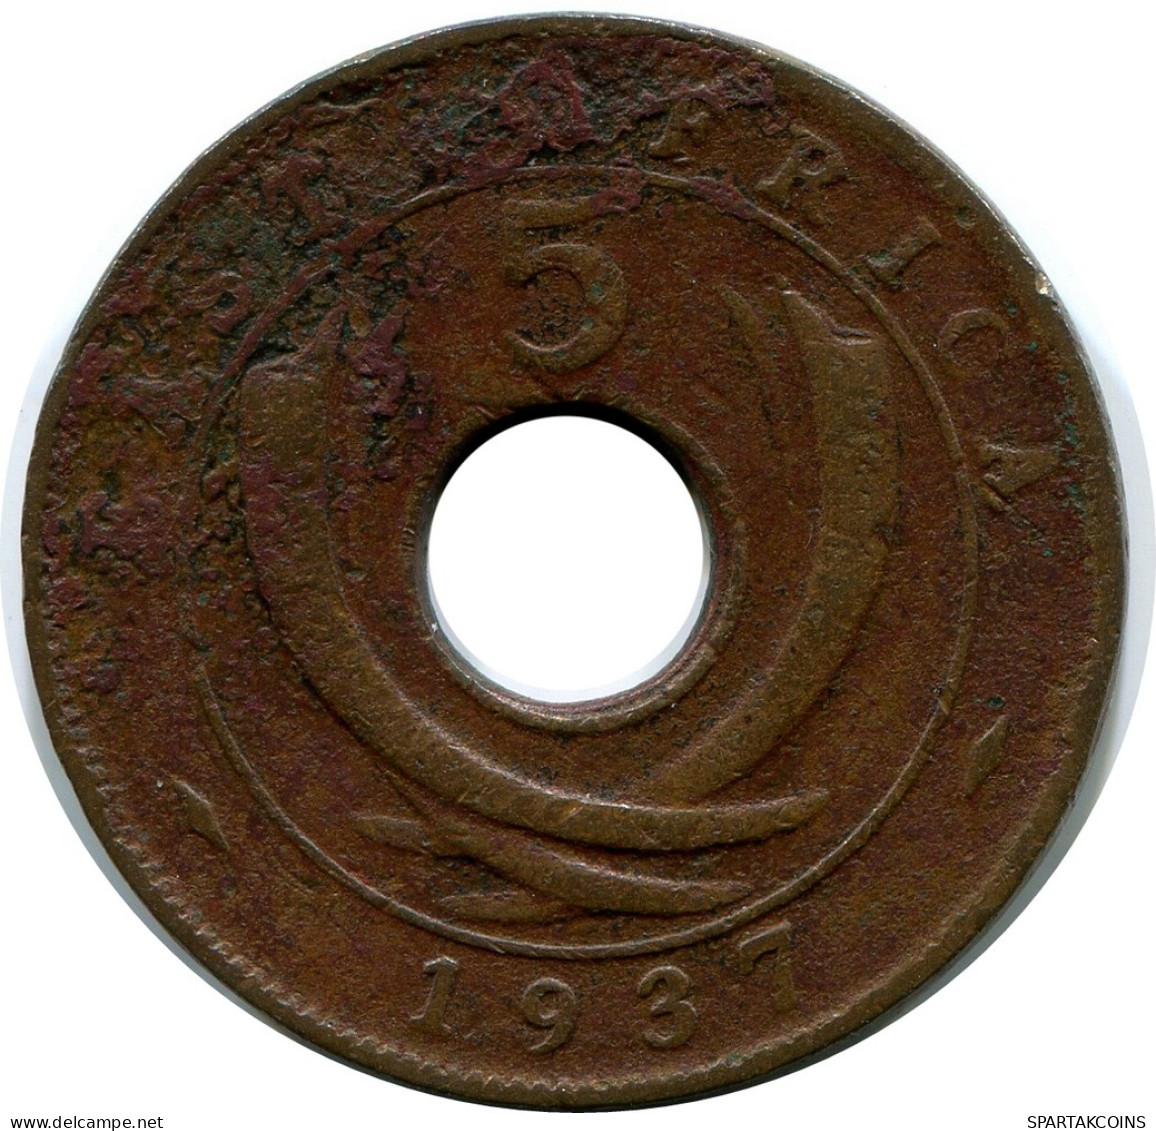 5 CENTS 1937 EAST AFRICA Coin #AP873.U - Colonia Británica